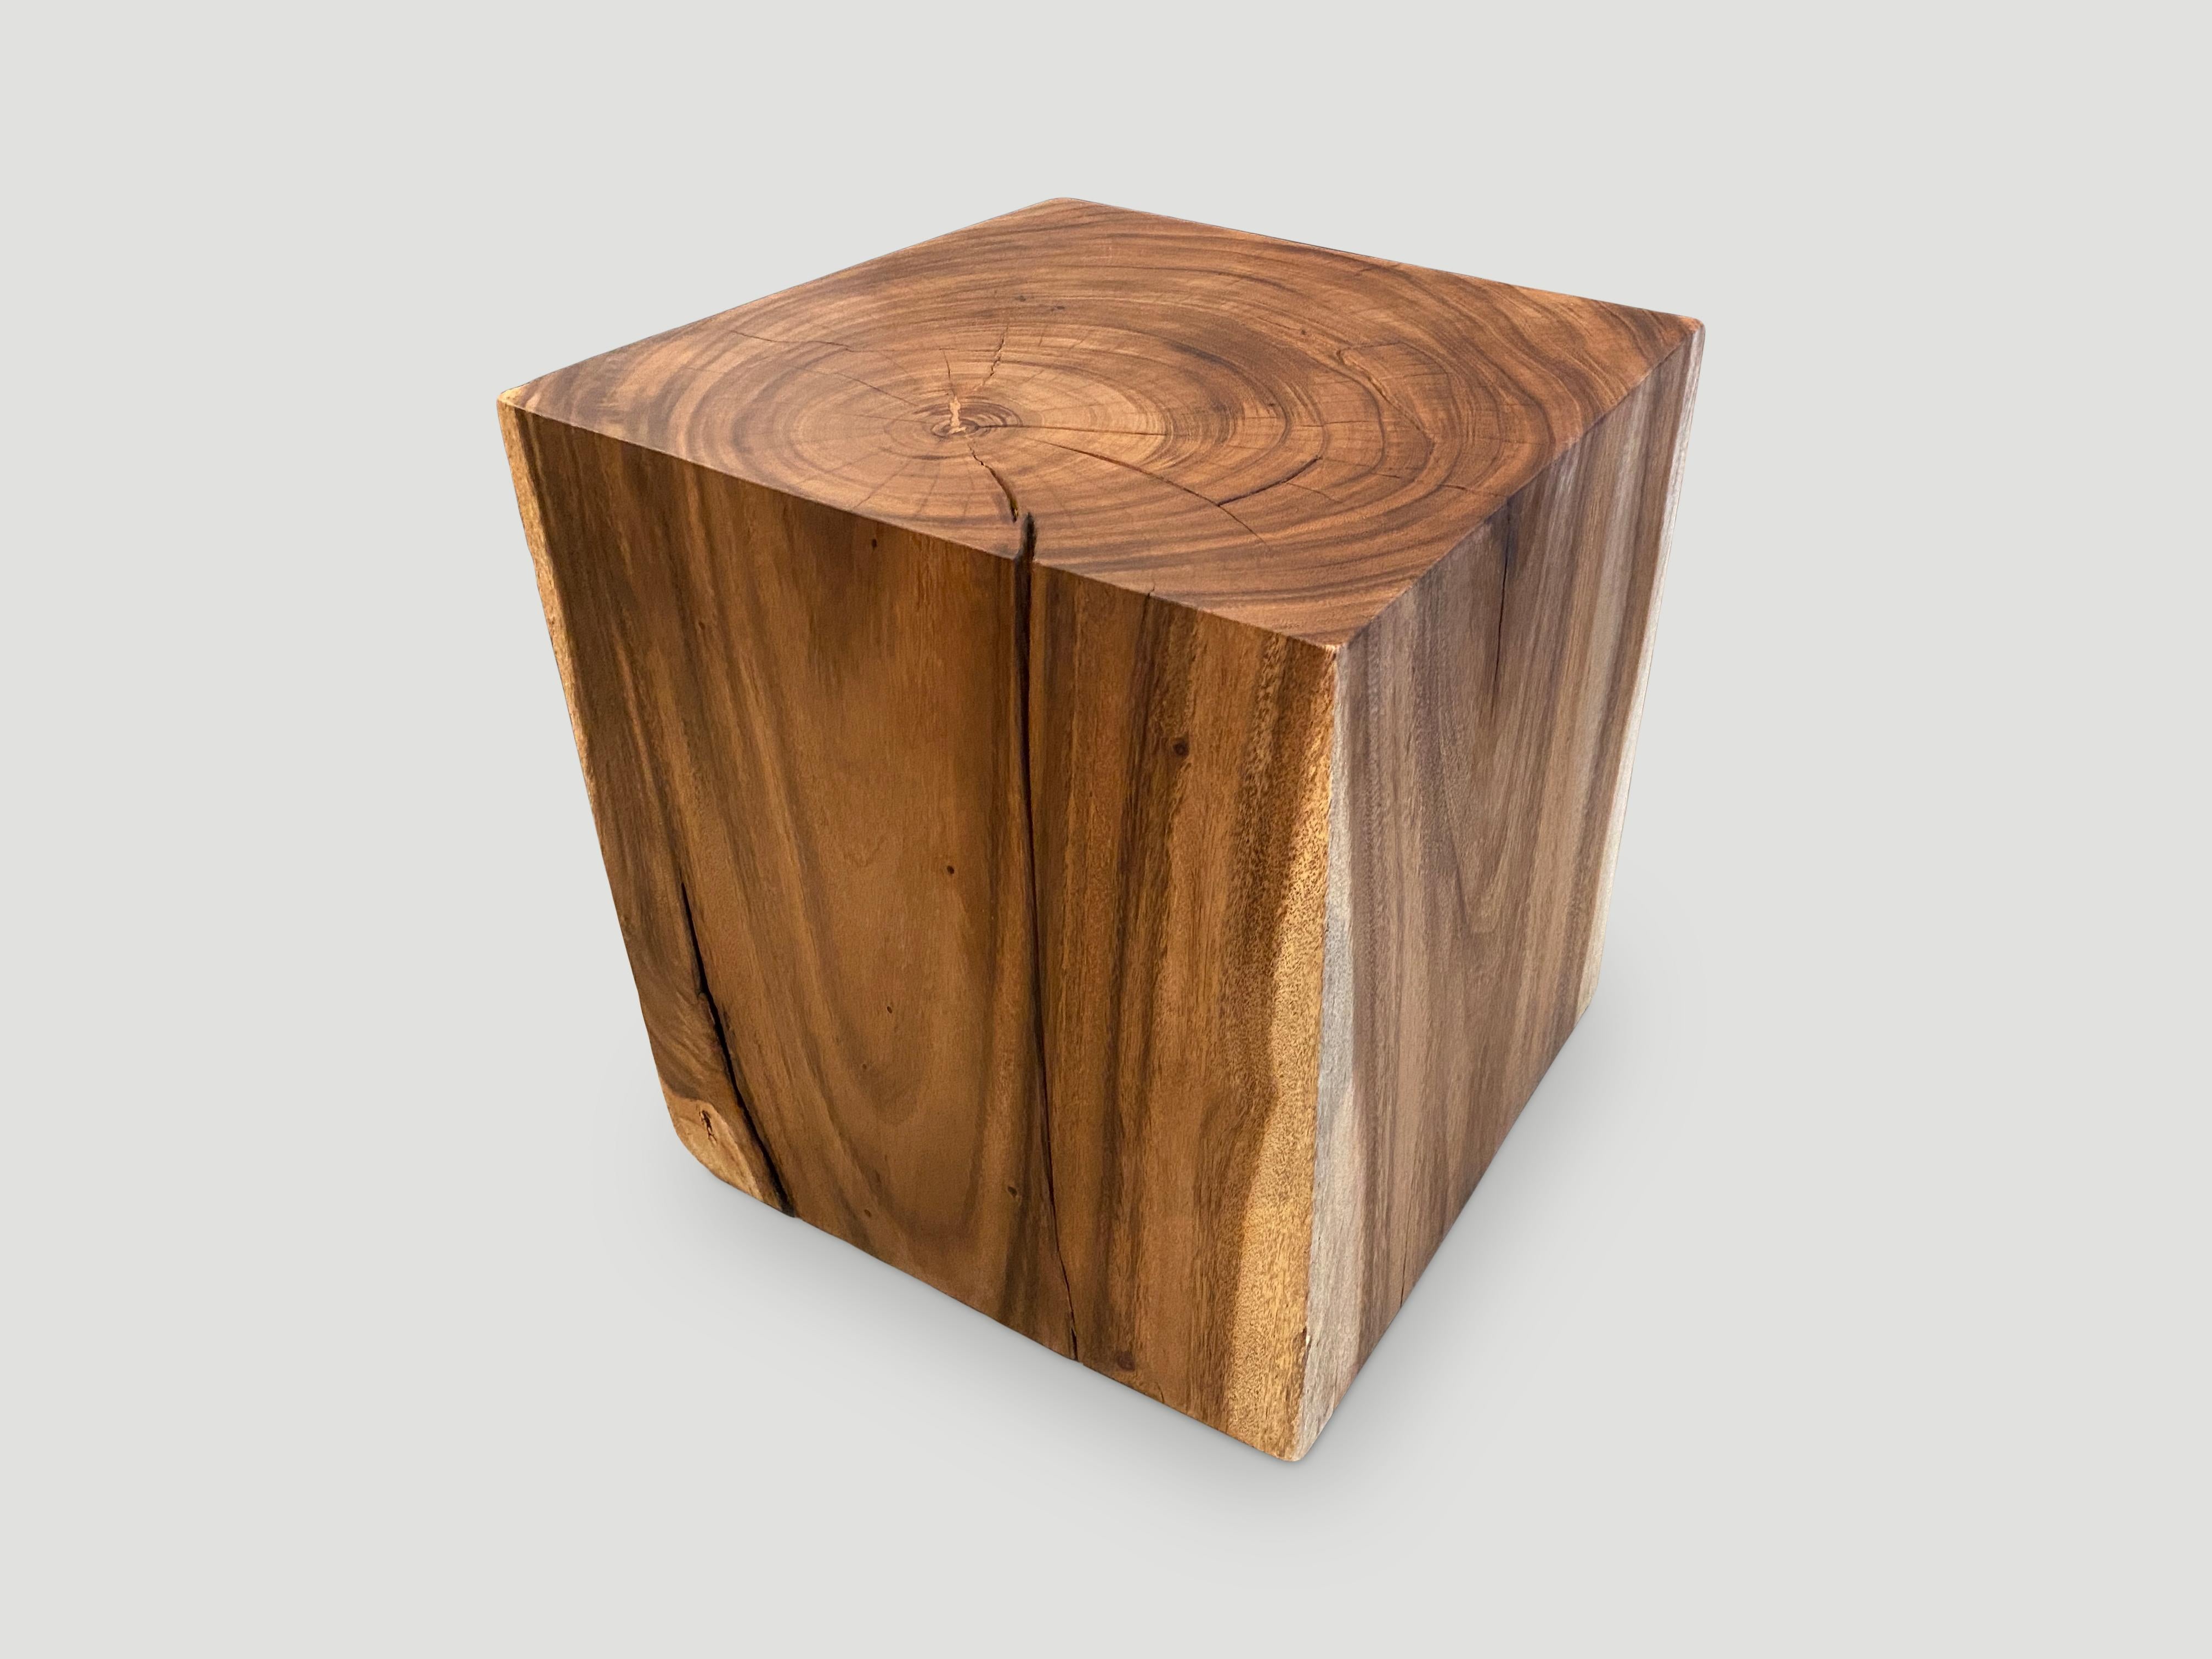 Andrianna Shamaris Suar Wood Origami Side Table In Excellent Condition For Sale In New York, NY